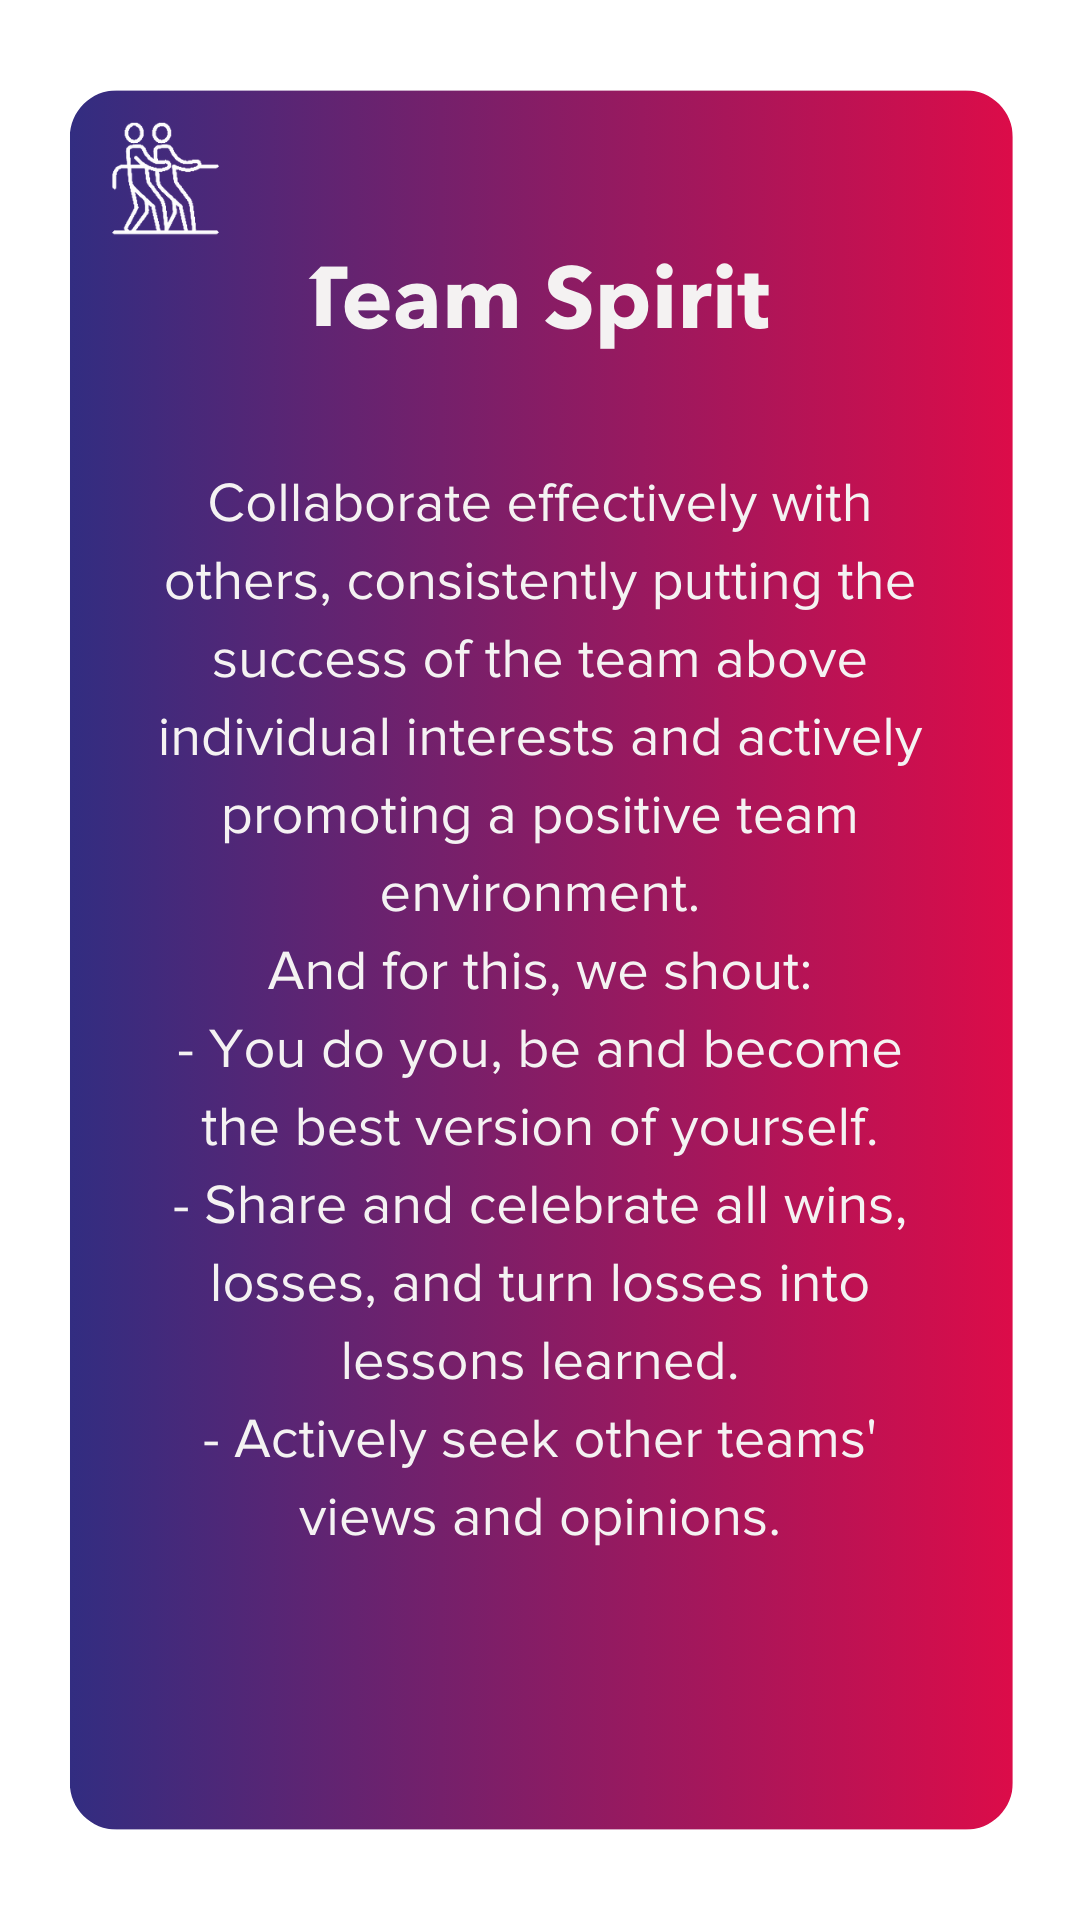 Team spirit: Collaborate effectively with others, consistently putting the success of the team above individual interests and actively promoting a positive team environment. And for this, we shout: - You do you, be and become the best version of yourself. - Share and celebrate all wins, losses, and turn losses into lessons learned. - Actively seek other teams' views and opinions.